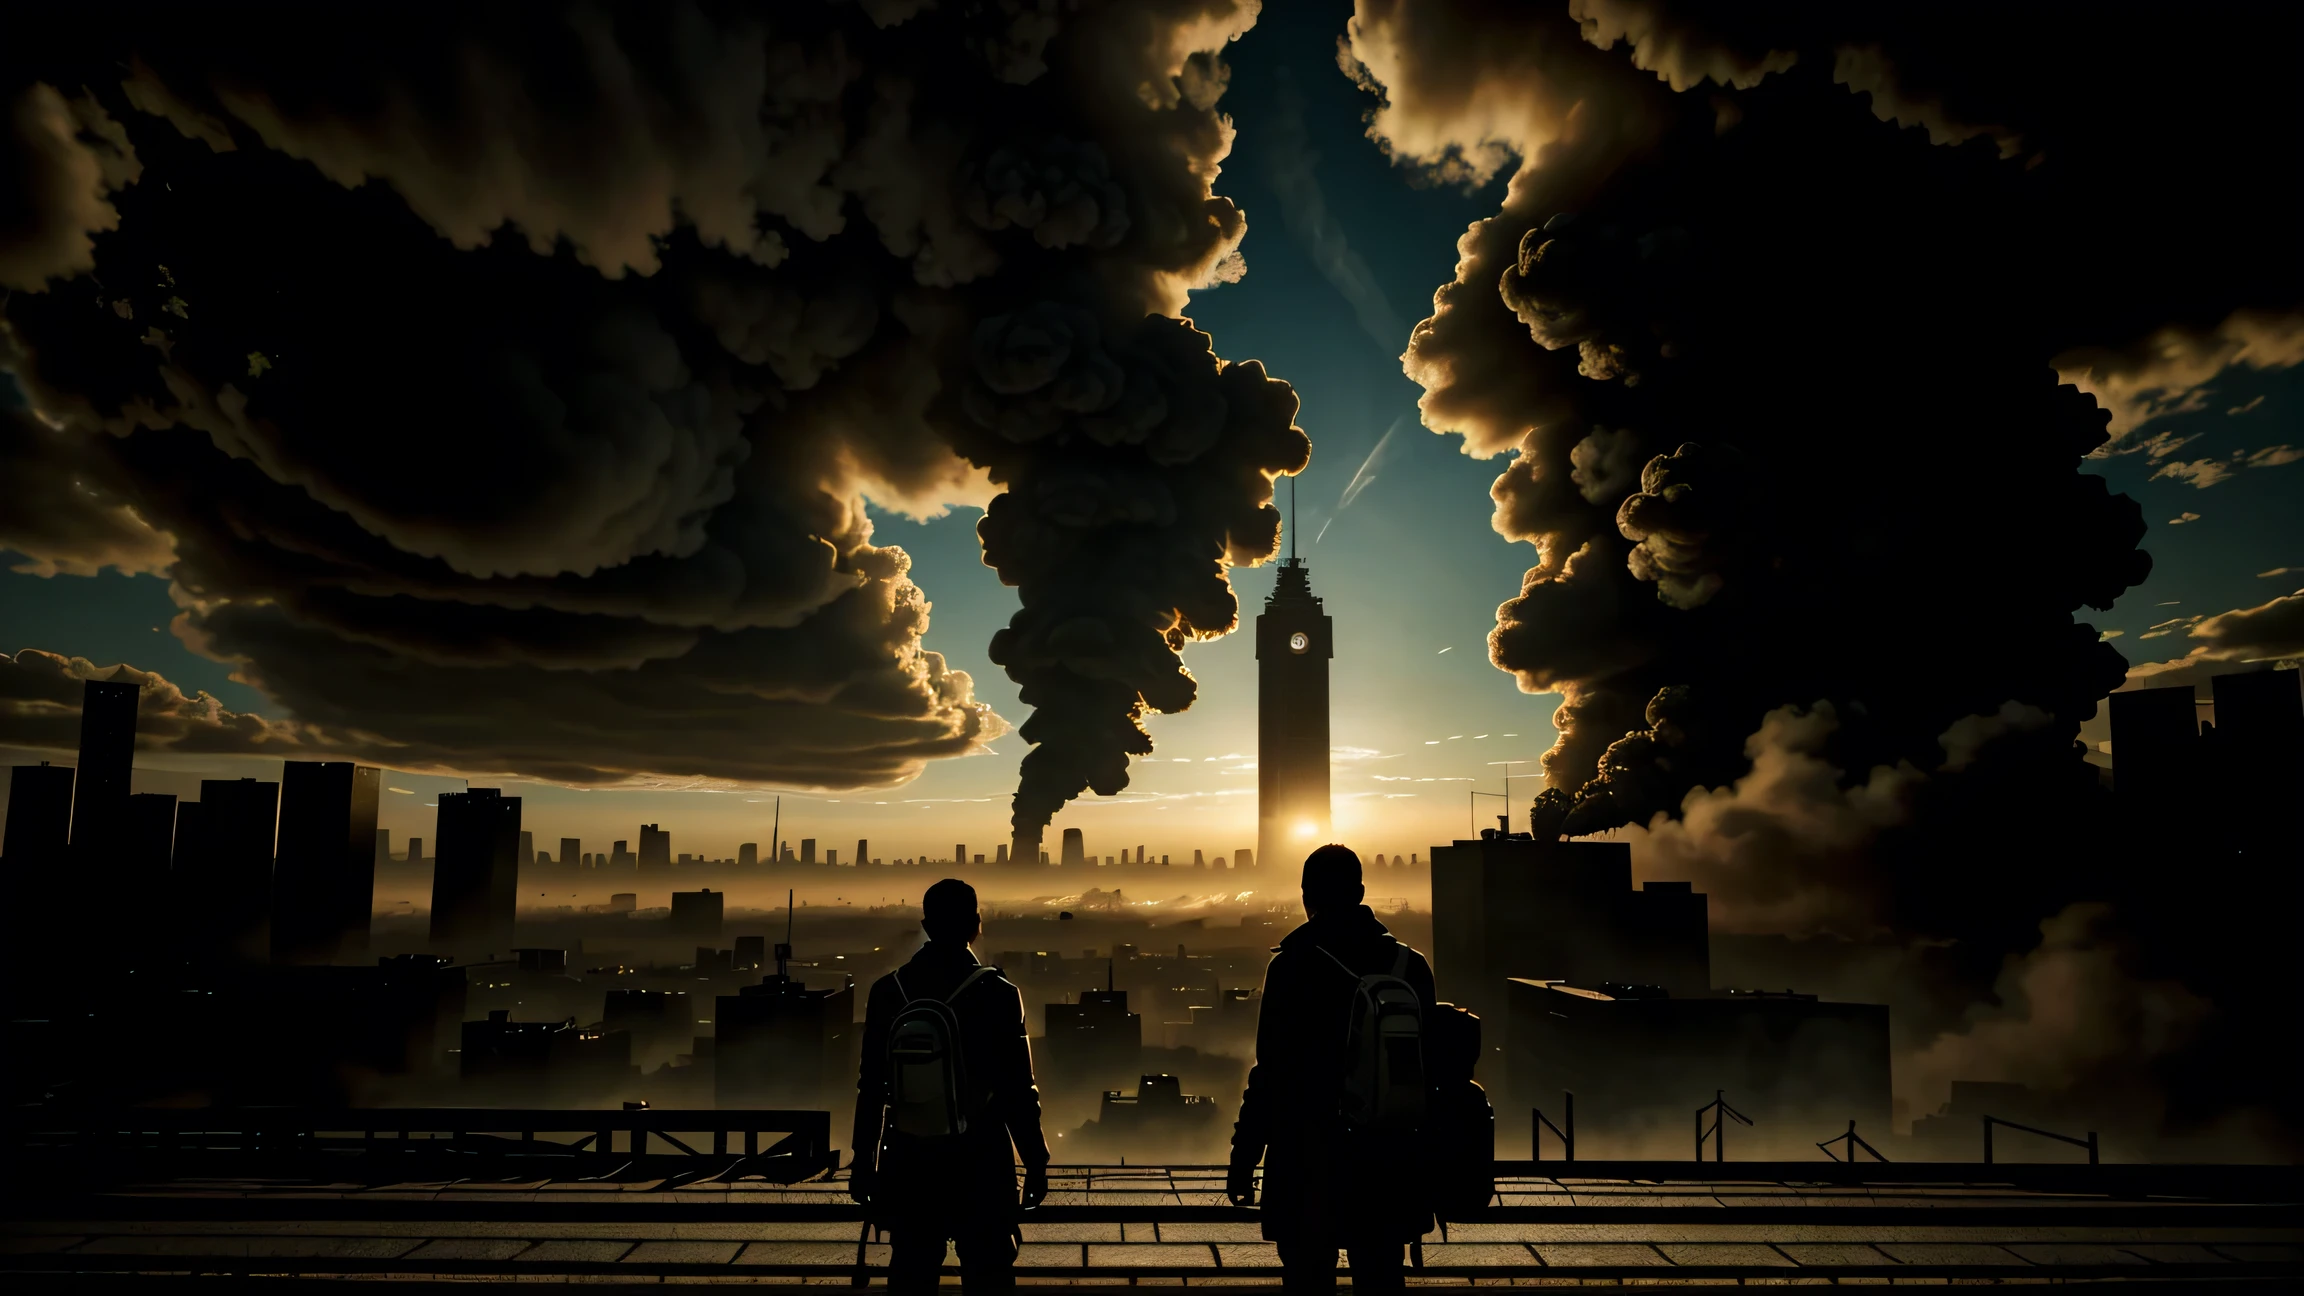 post Apocalyptic scene, a man and a woman standing in front of a tower with fire and smoke, dressed in ragged clothing, creepy sky, backpack, bag, clouds, outdoors, scarf, buildings, fire, realistic, city, looking_at_viewer, coat